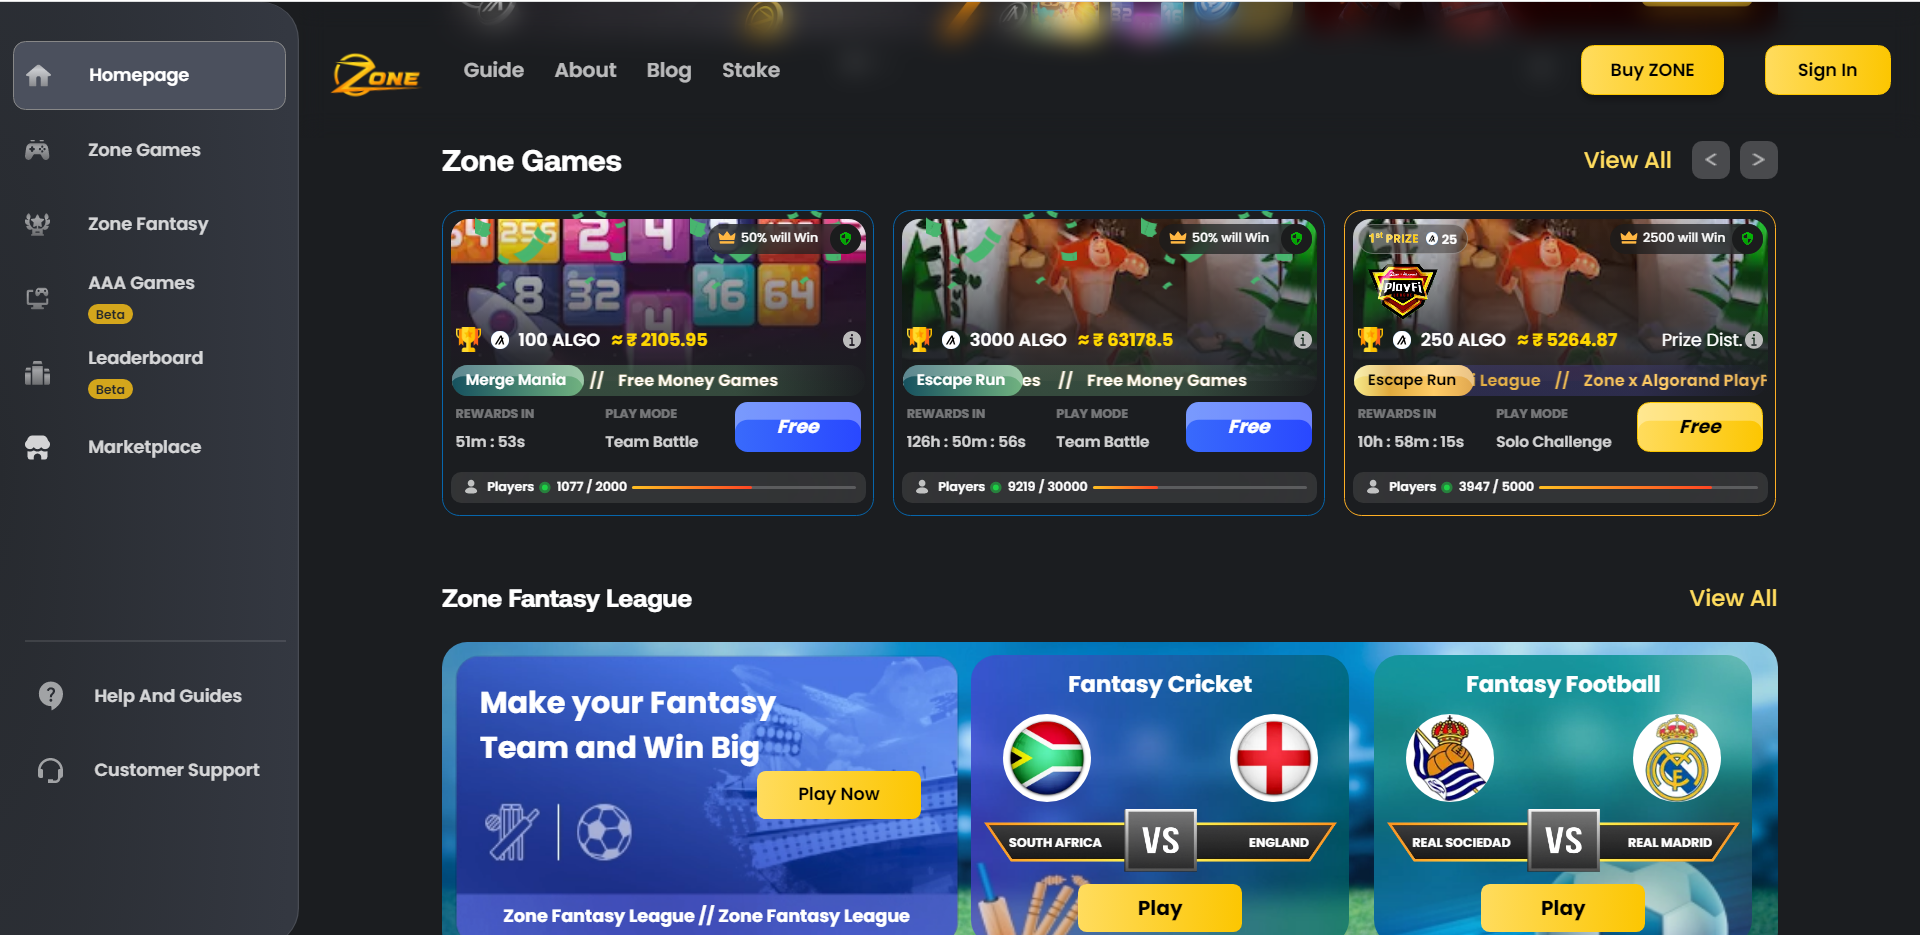 Get Paid to Play: The Best Online Gaming Platform for Easy Money